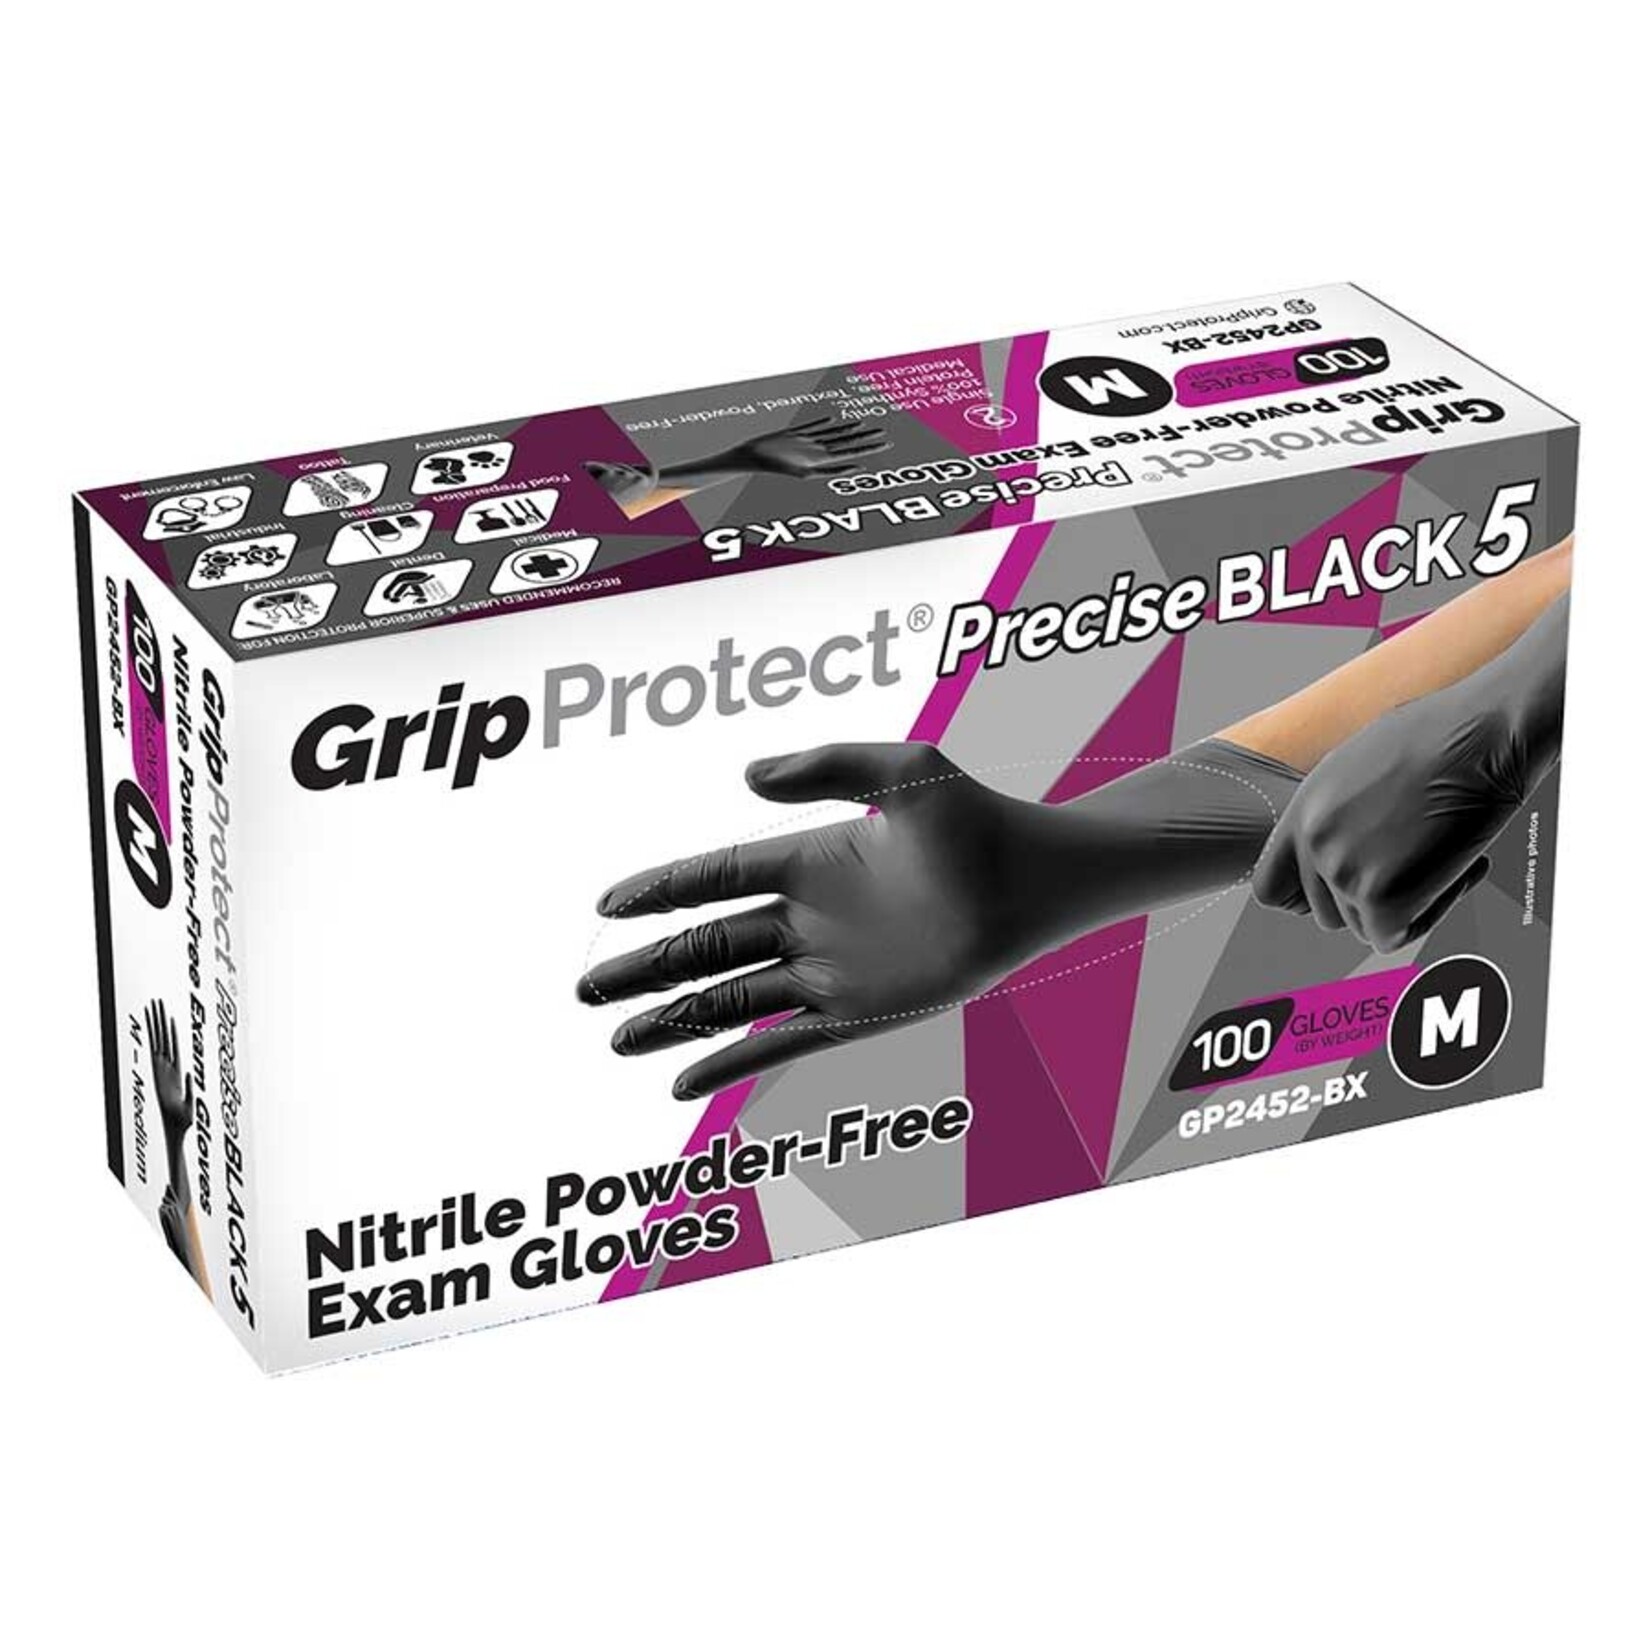 BMC Protect GripProtect Precise BLACK 5 Nitrile Powder-Free Exam Gloves, M (Case of 10 Boxes)